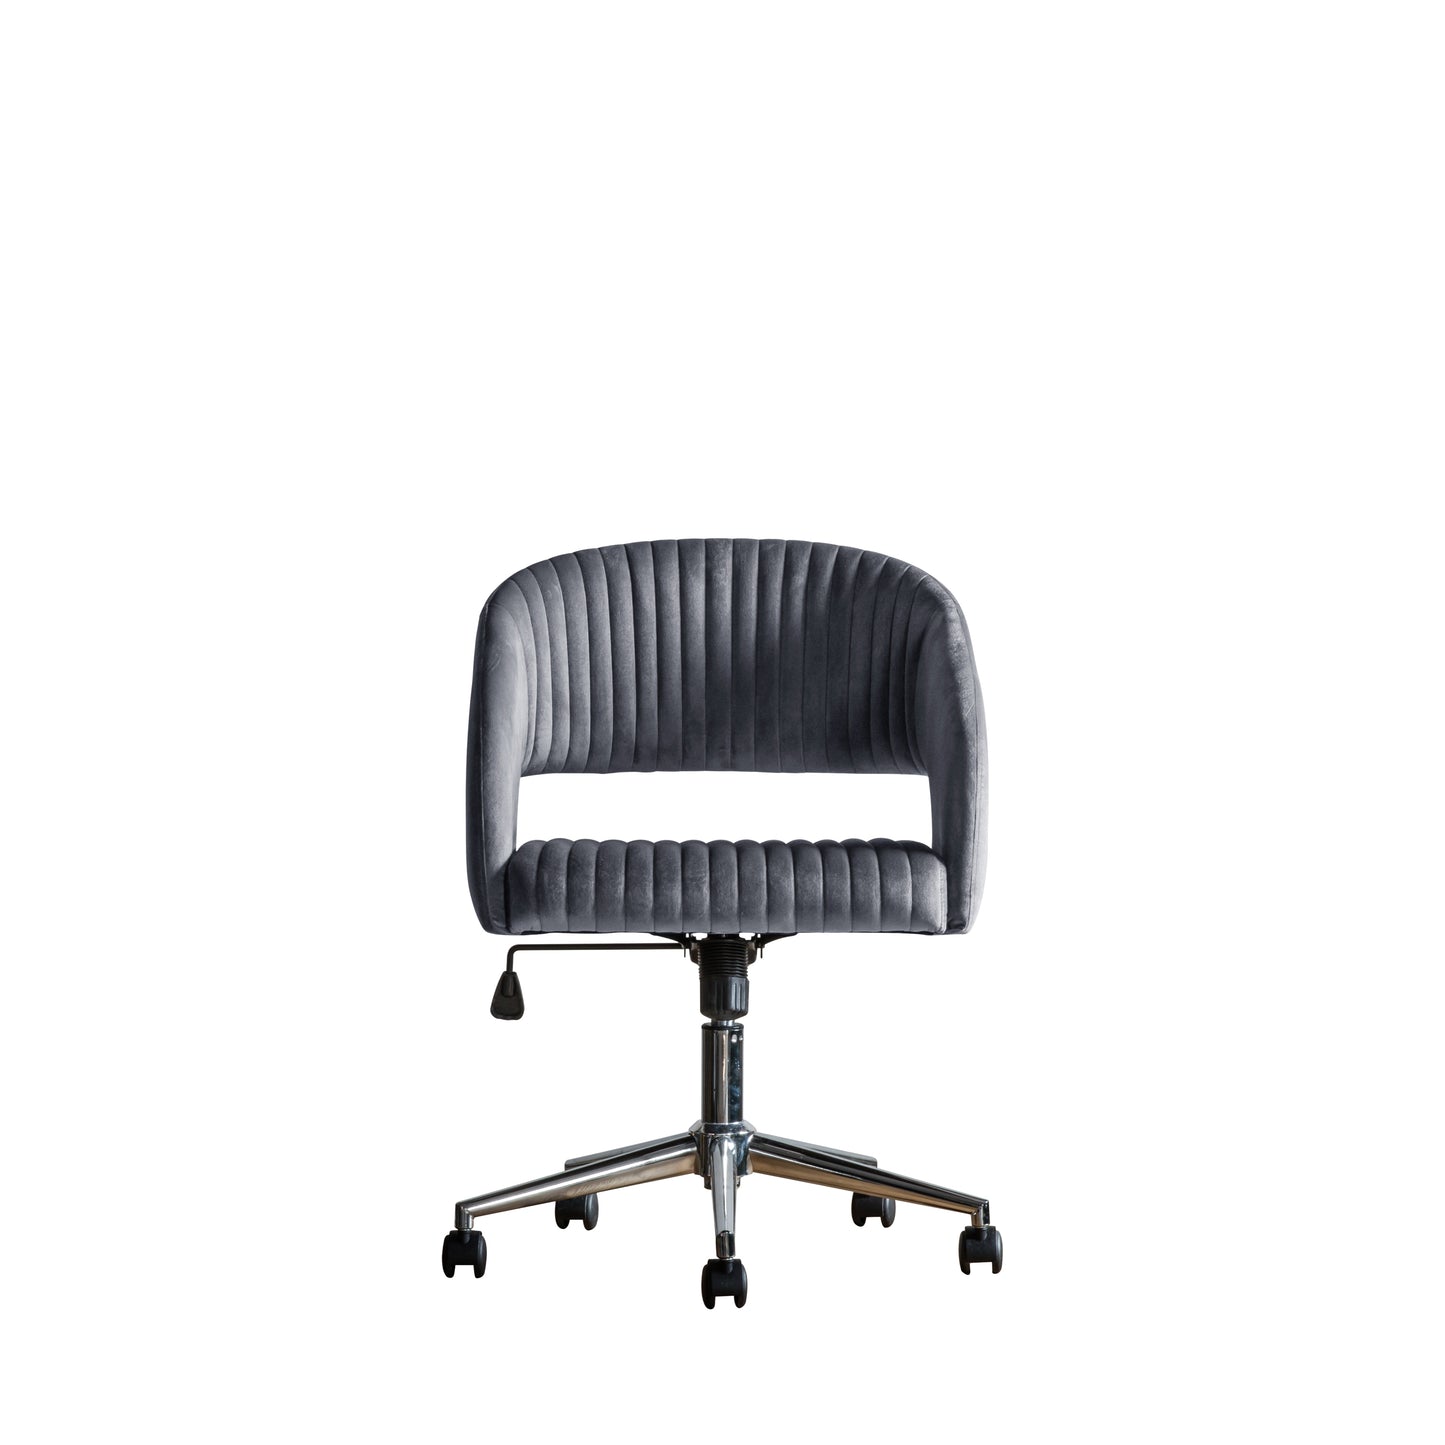 A Murray Swivel Chair Charcoal Velvet for home furniture and interior decor on a white background.